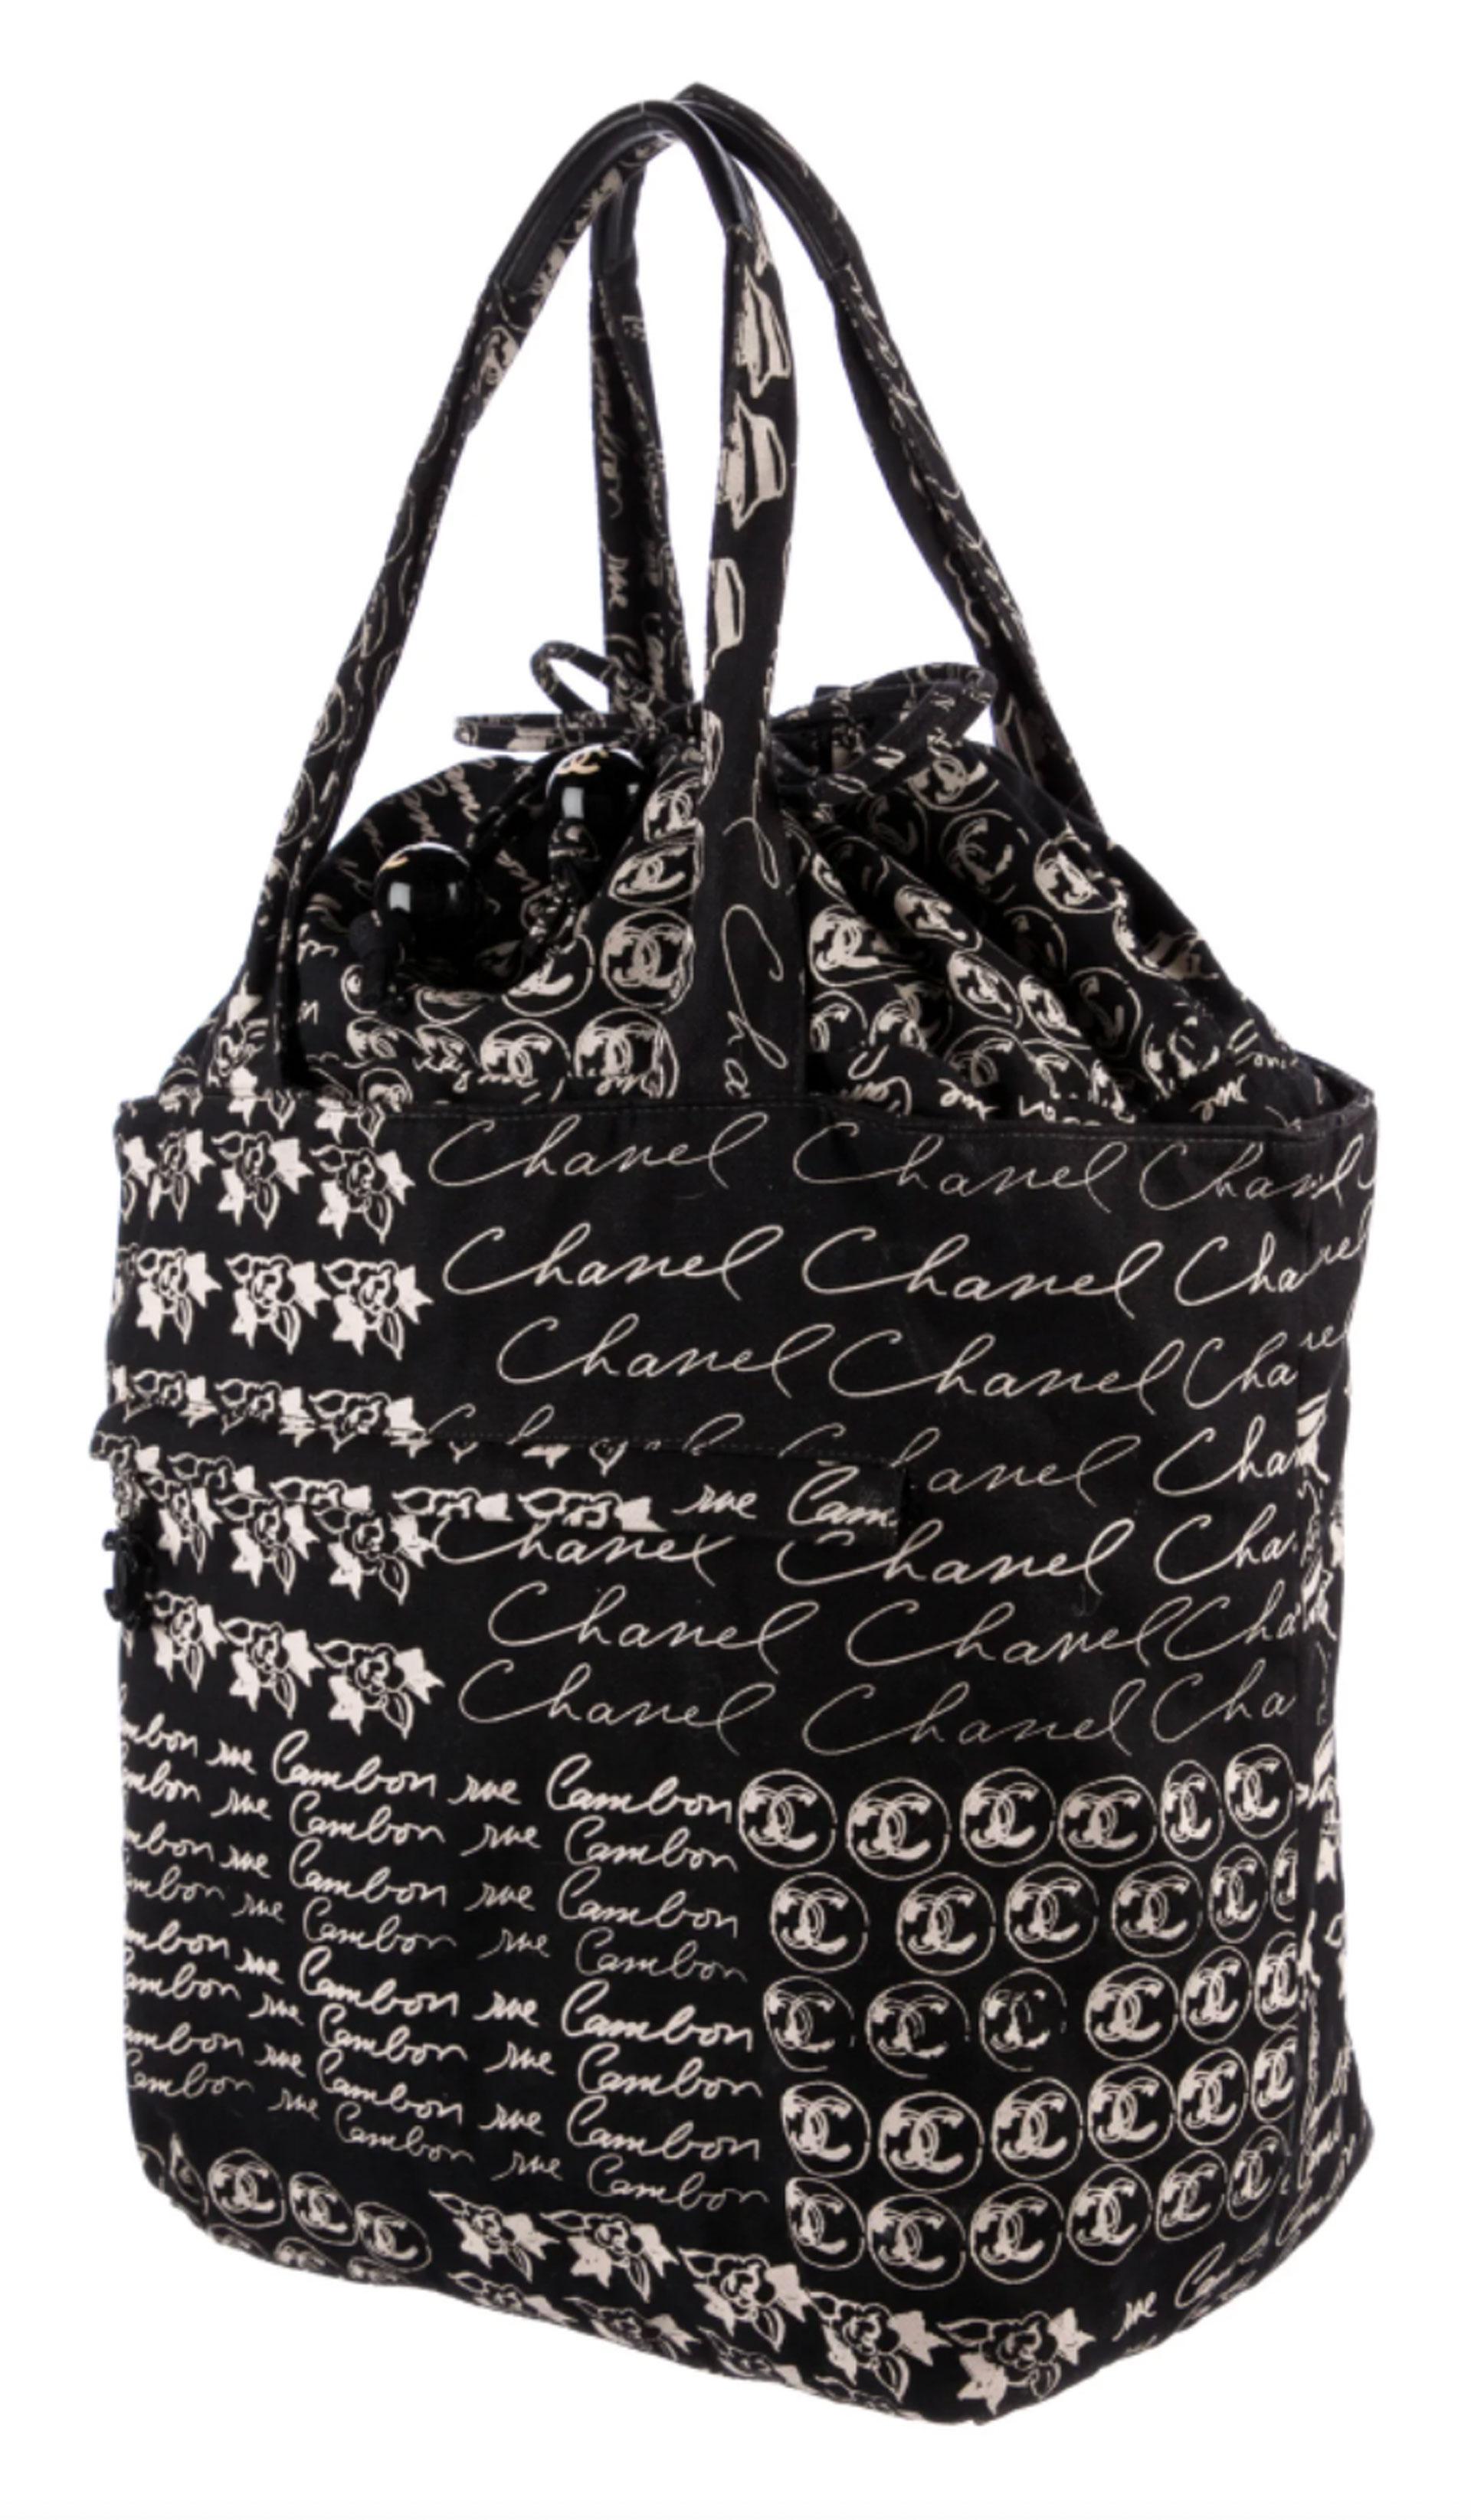 Chanel Vintage Black CC Logo Large Drawstring Tote

Drawstring Closure
Adorned with a large CC charm and round CC logo ball at the drawstring end

Made in France 
